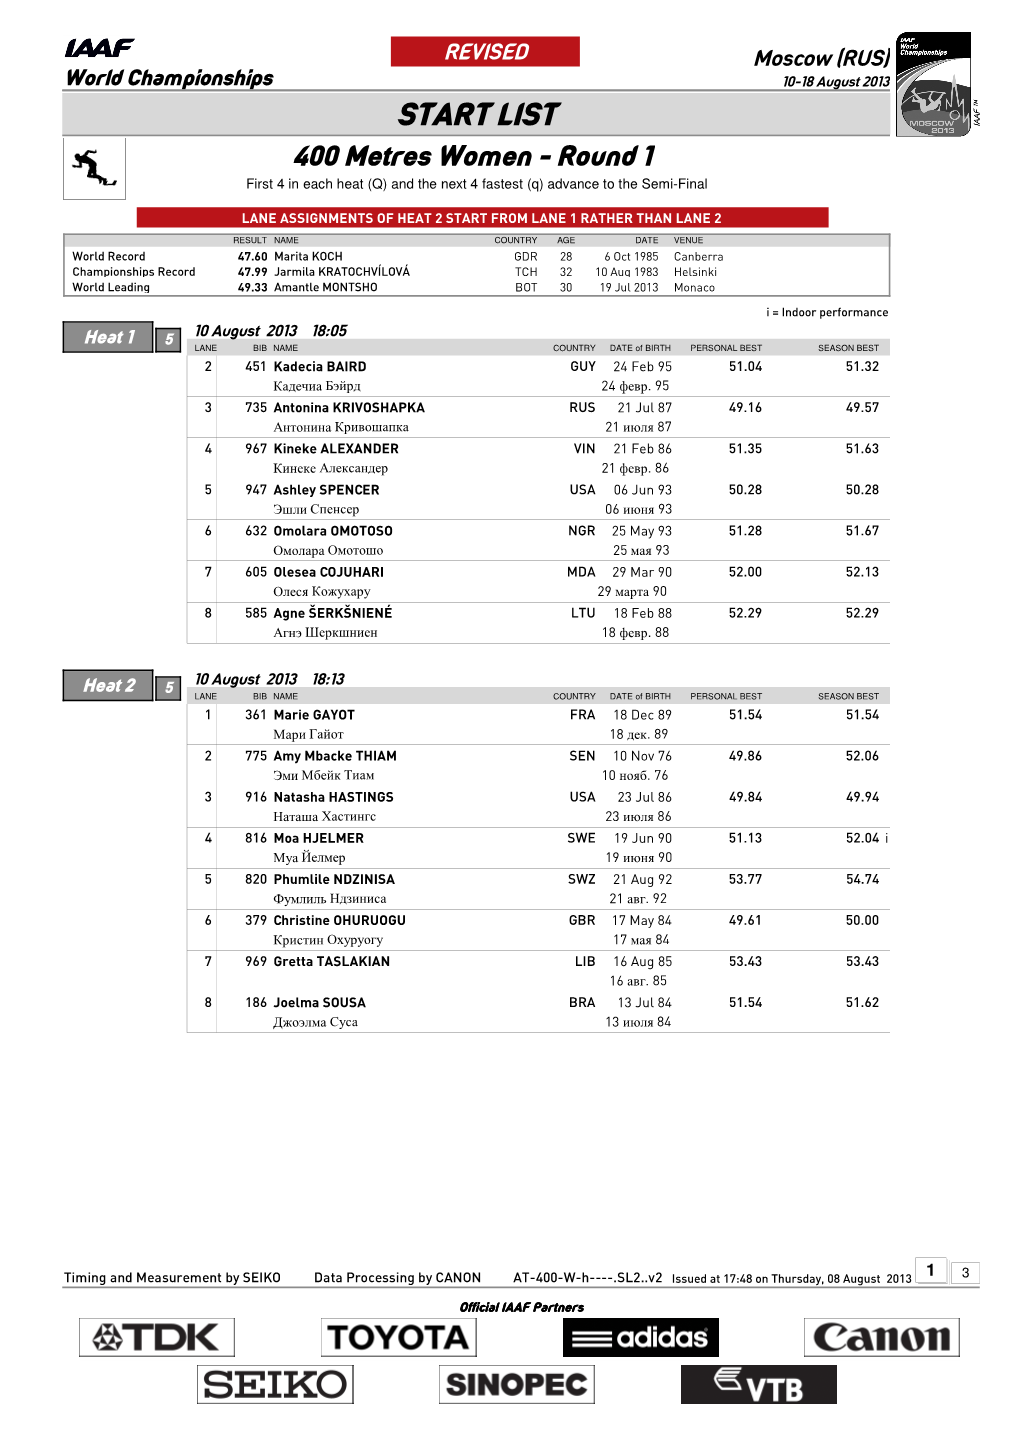 START LIST 400 Metres Women - Round 1 First 4 in Each Heat (Q) and the Next 4 Fastest (Q) Advance to the Semi-Final